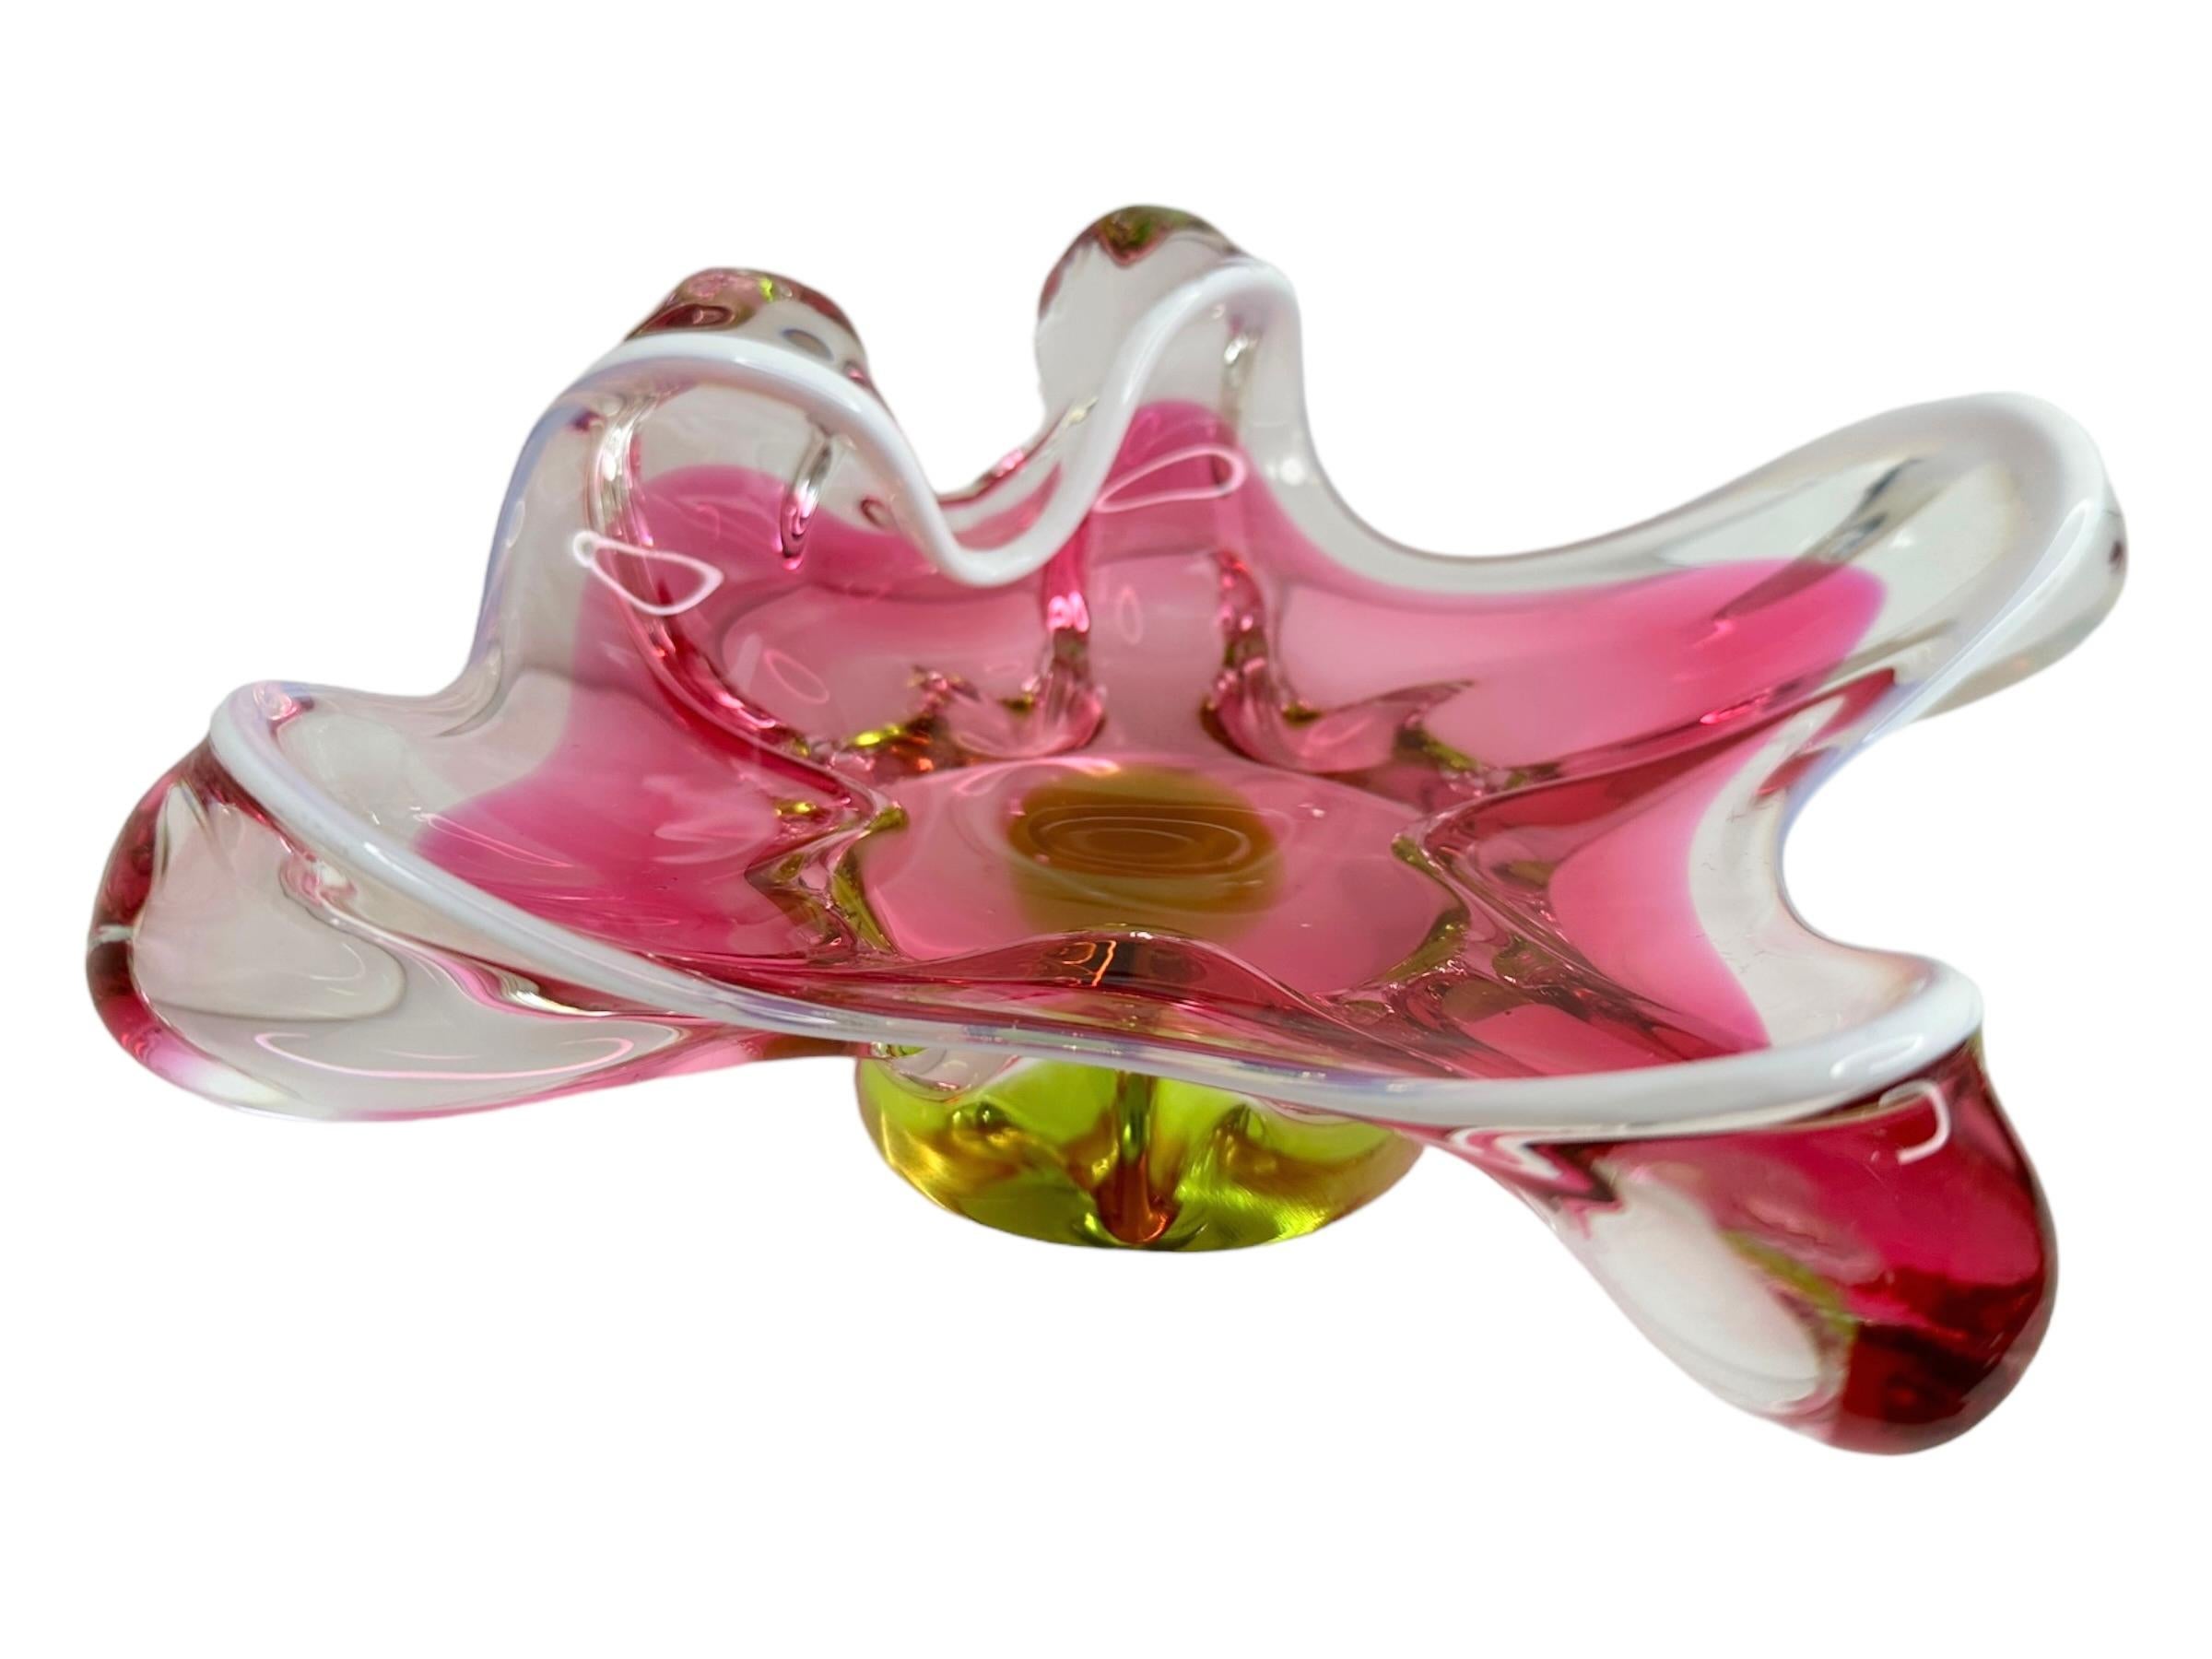 Gorgeous hand blown Murano art glass piece with Sommerso and bullicante techniques. A beautiful organic shaped bowl, catchall or centre piece, Venice, Murano, Italy, 1980s. Colors are pink, Clear, white and lime green. A nice addition to any room.